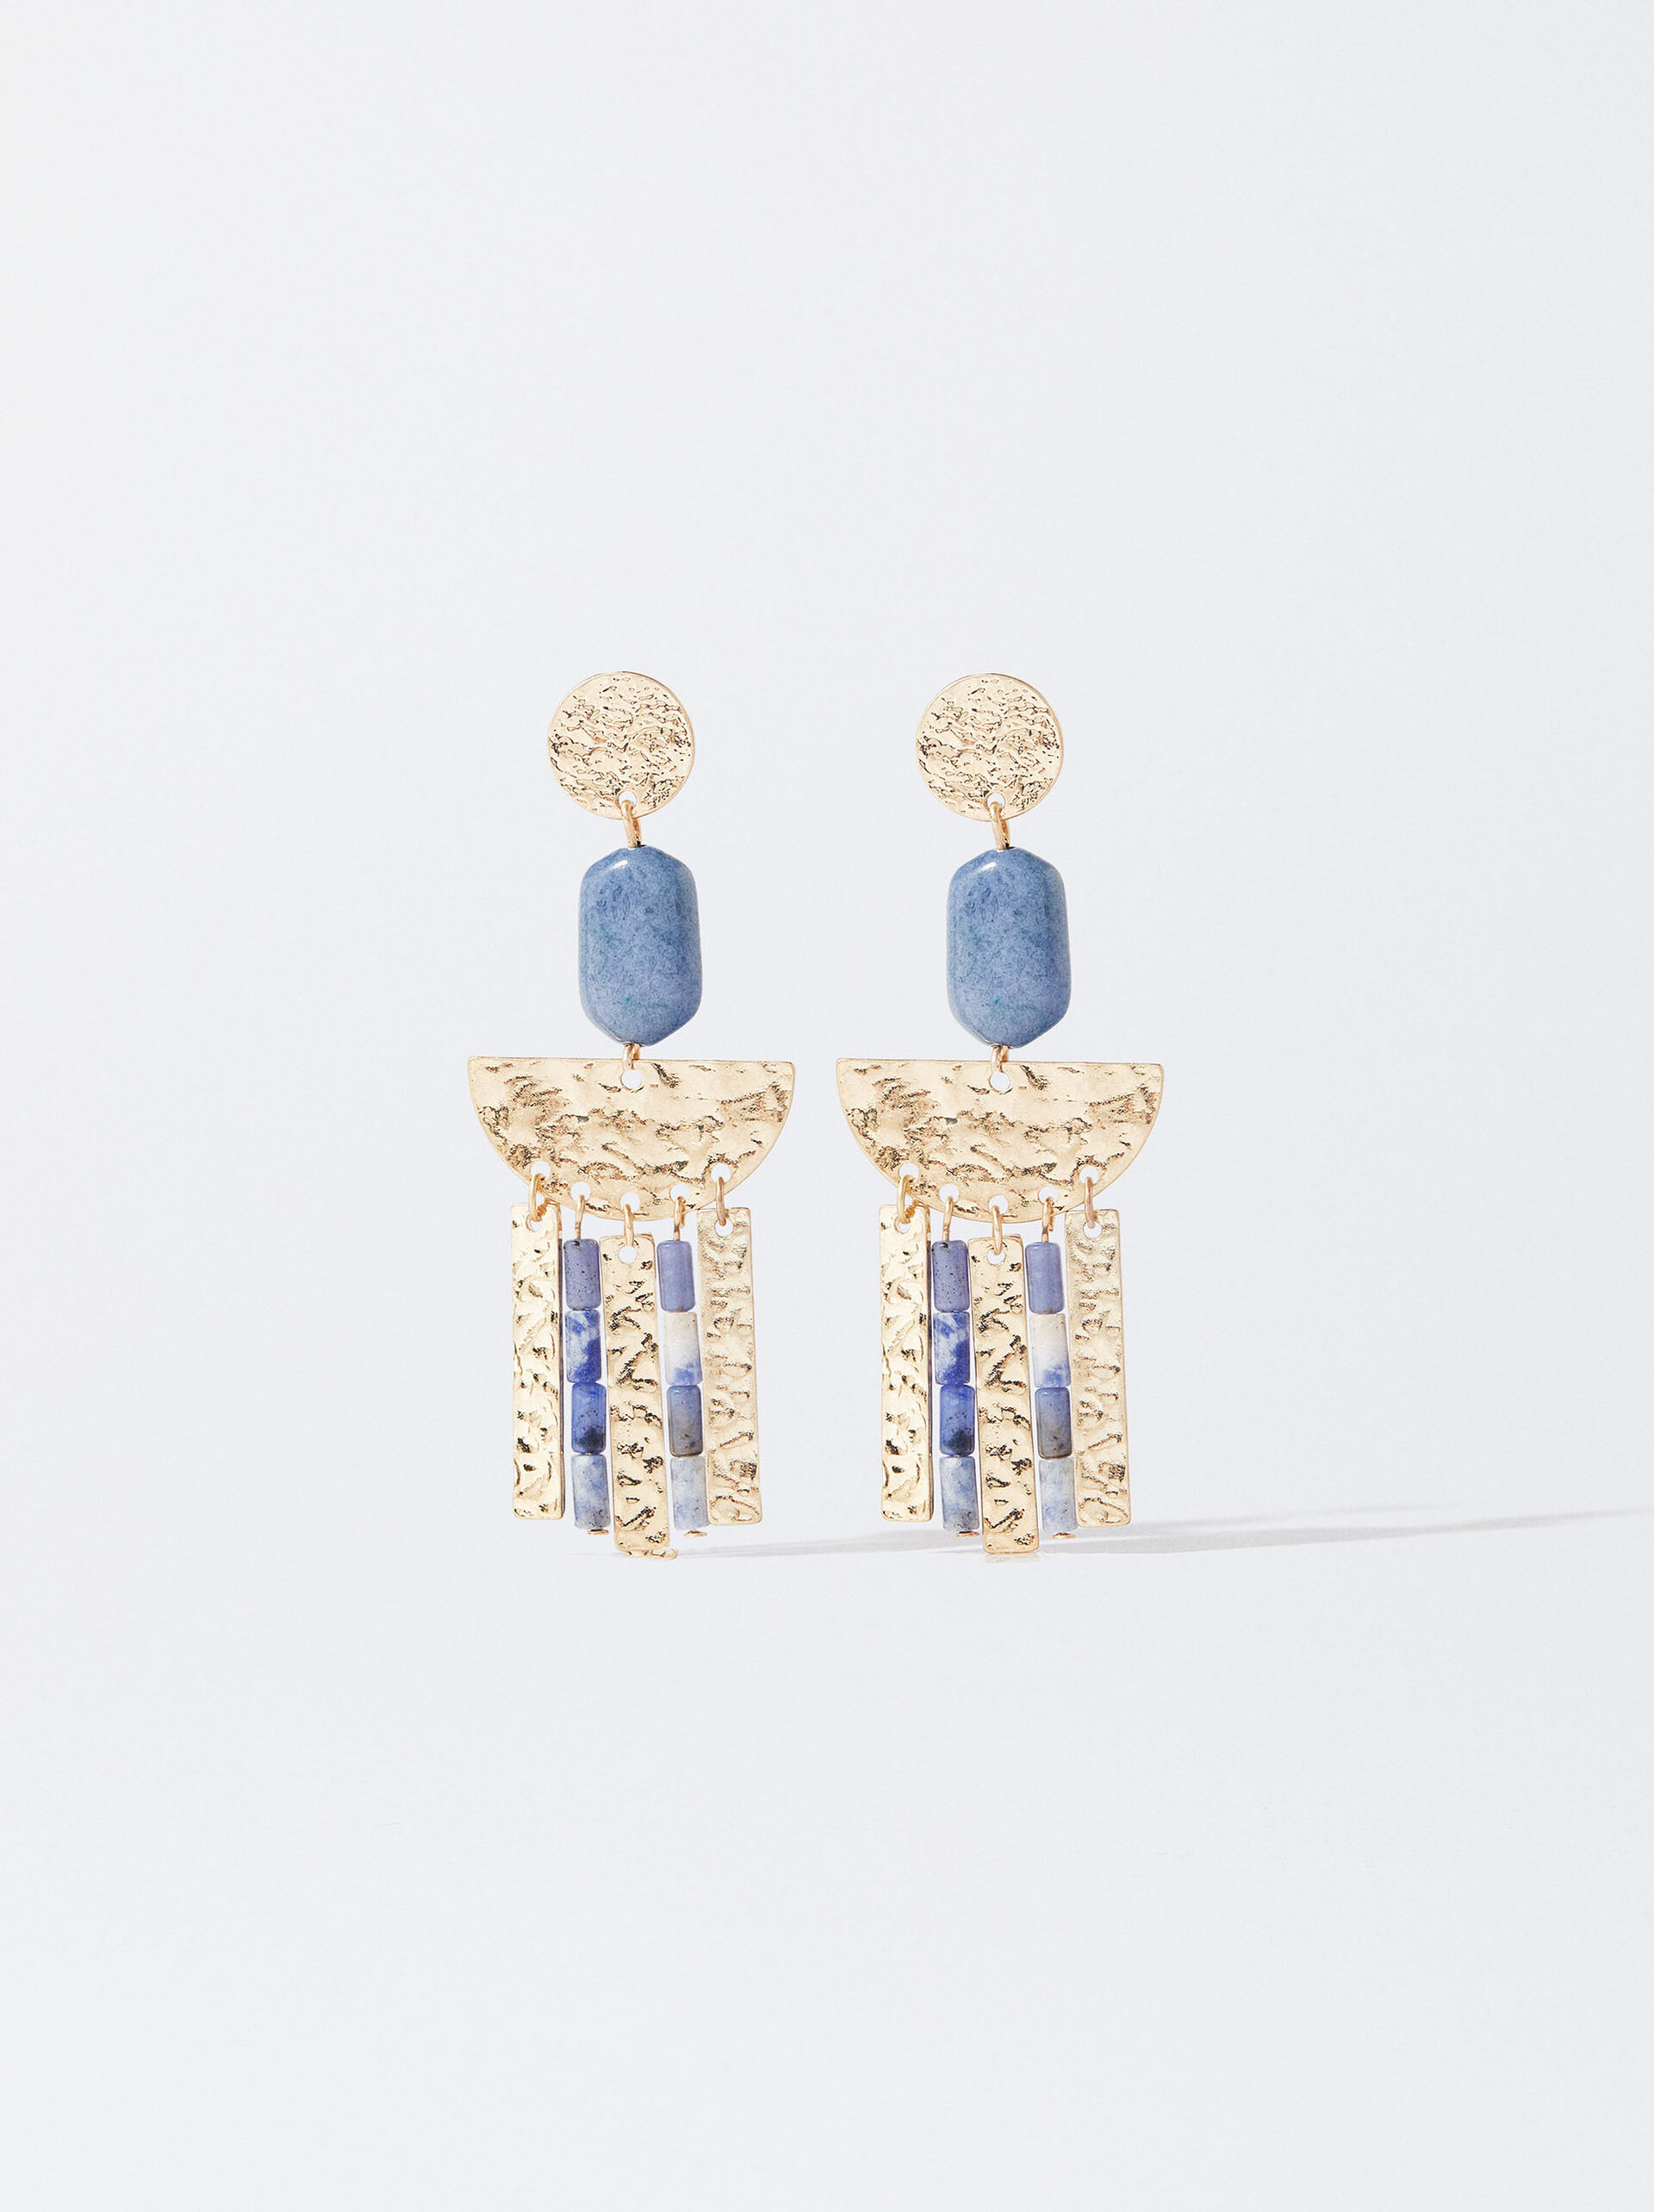 Gold-Toned Earrings With Stone image number 0.0